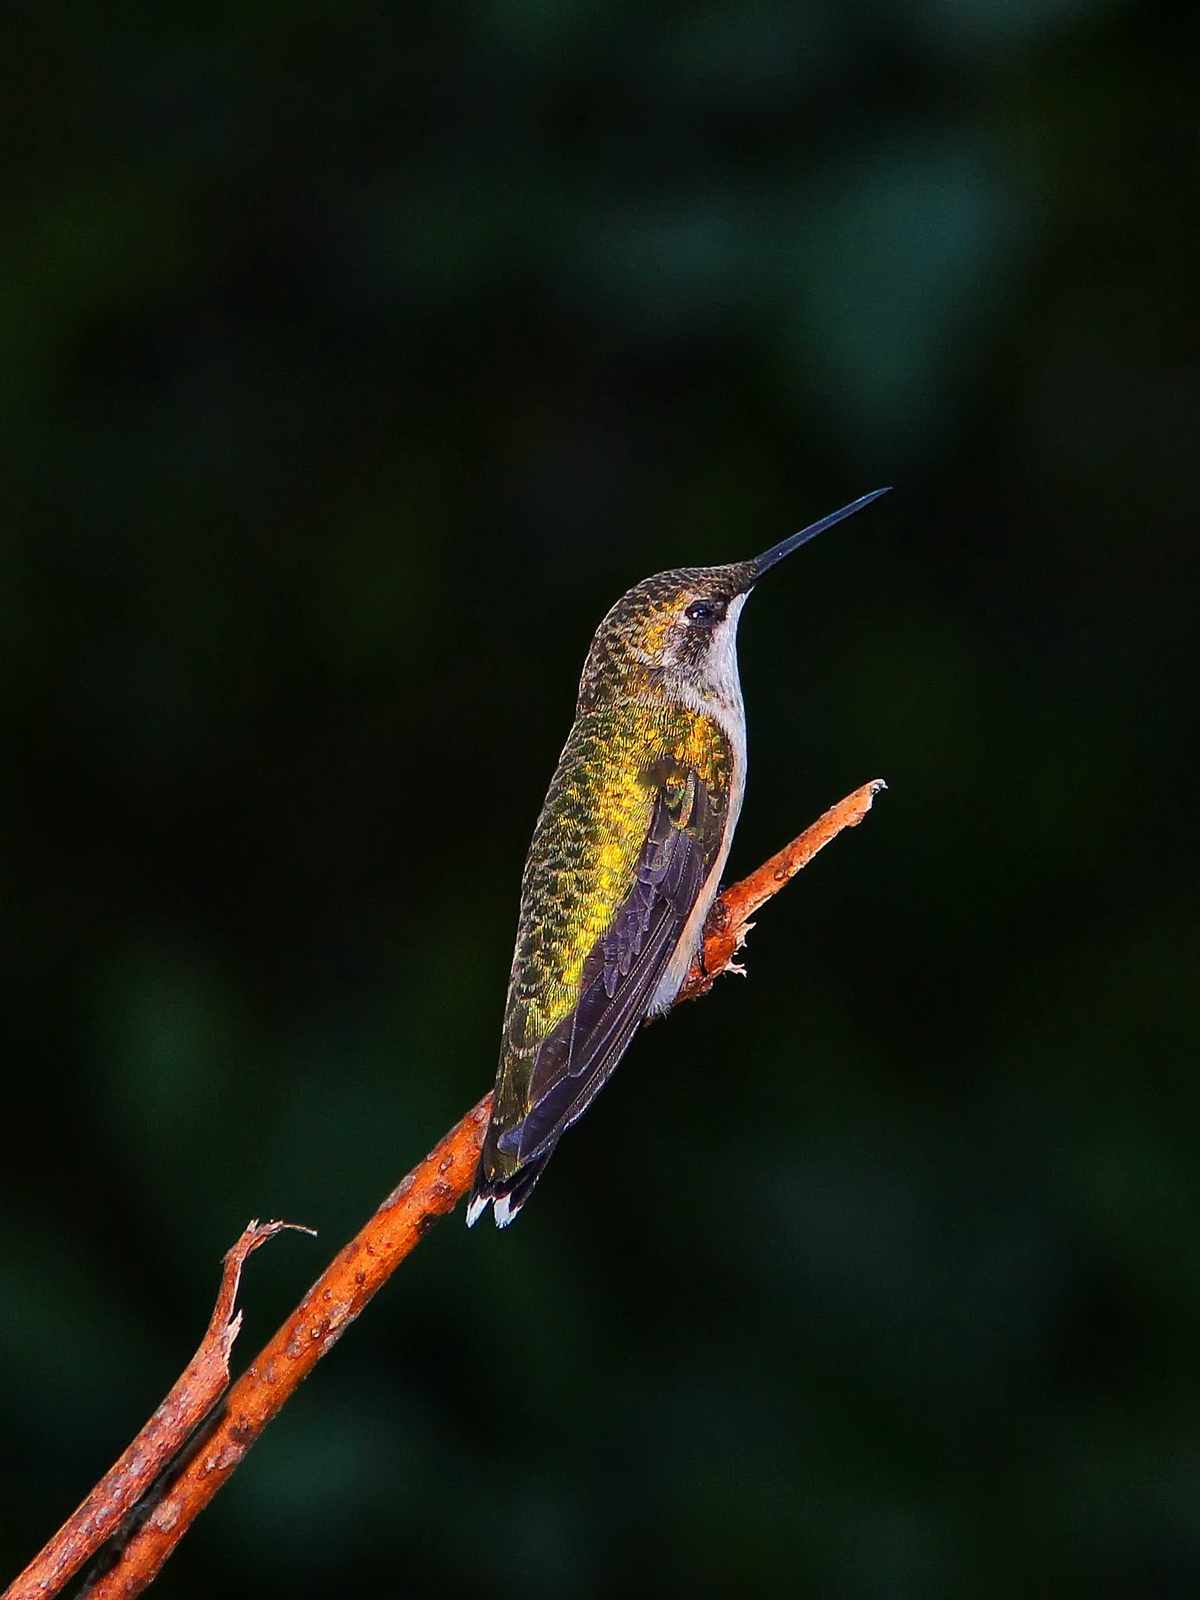 This beautiful Ruby Throated Hummingbird allowed me to quietly approach after its early morning drink.